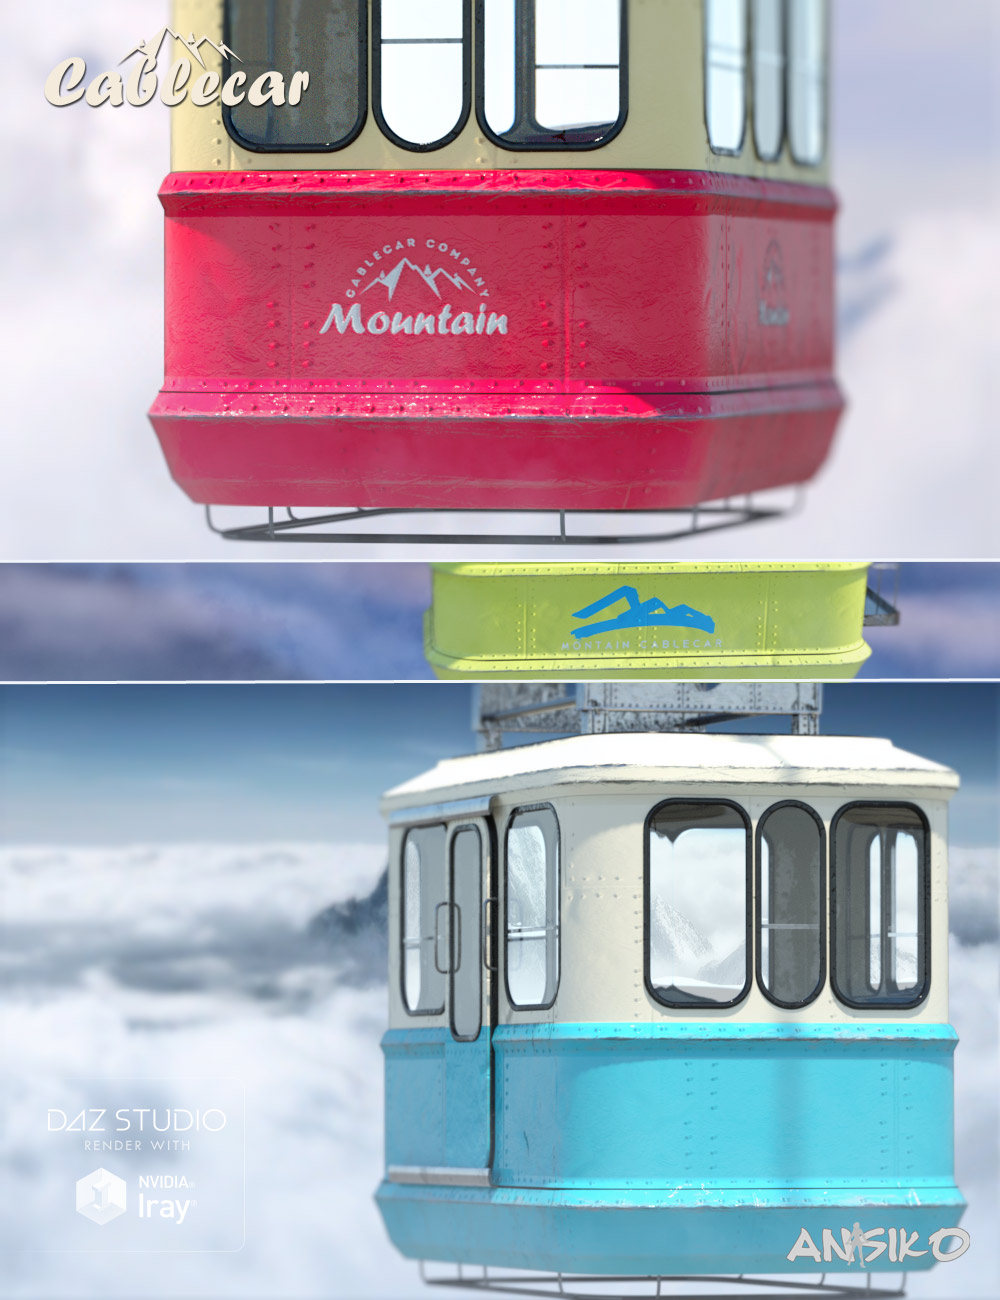 Cable Car by: Ansiko, 3D Models by Daz 3D